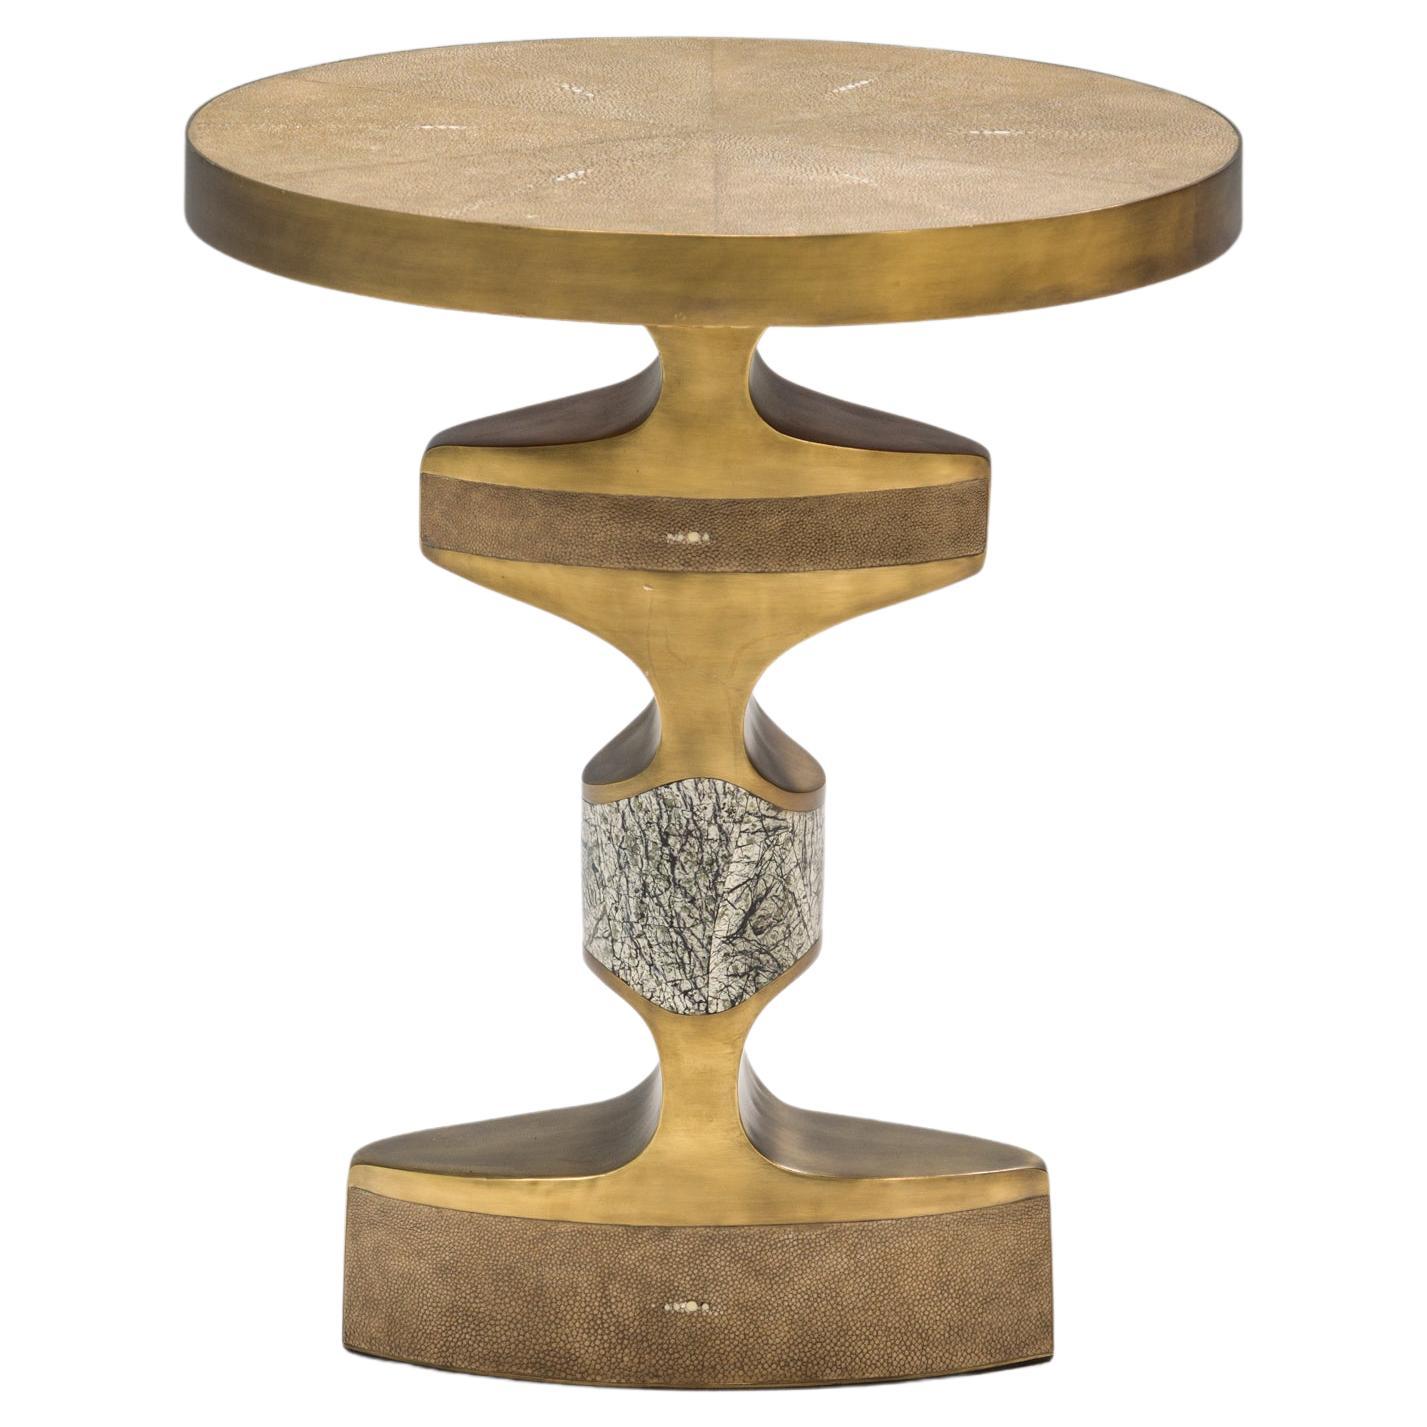 R & Y AUGOUSTI Shagreen and Baguio Green Stone Carmen Side Table